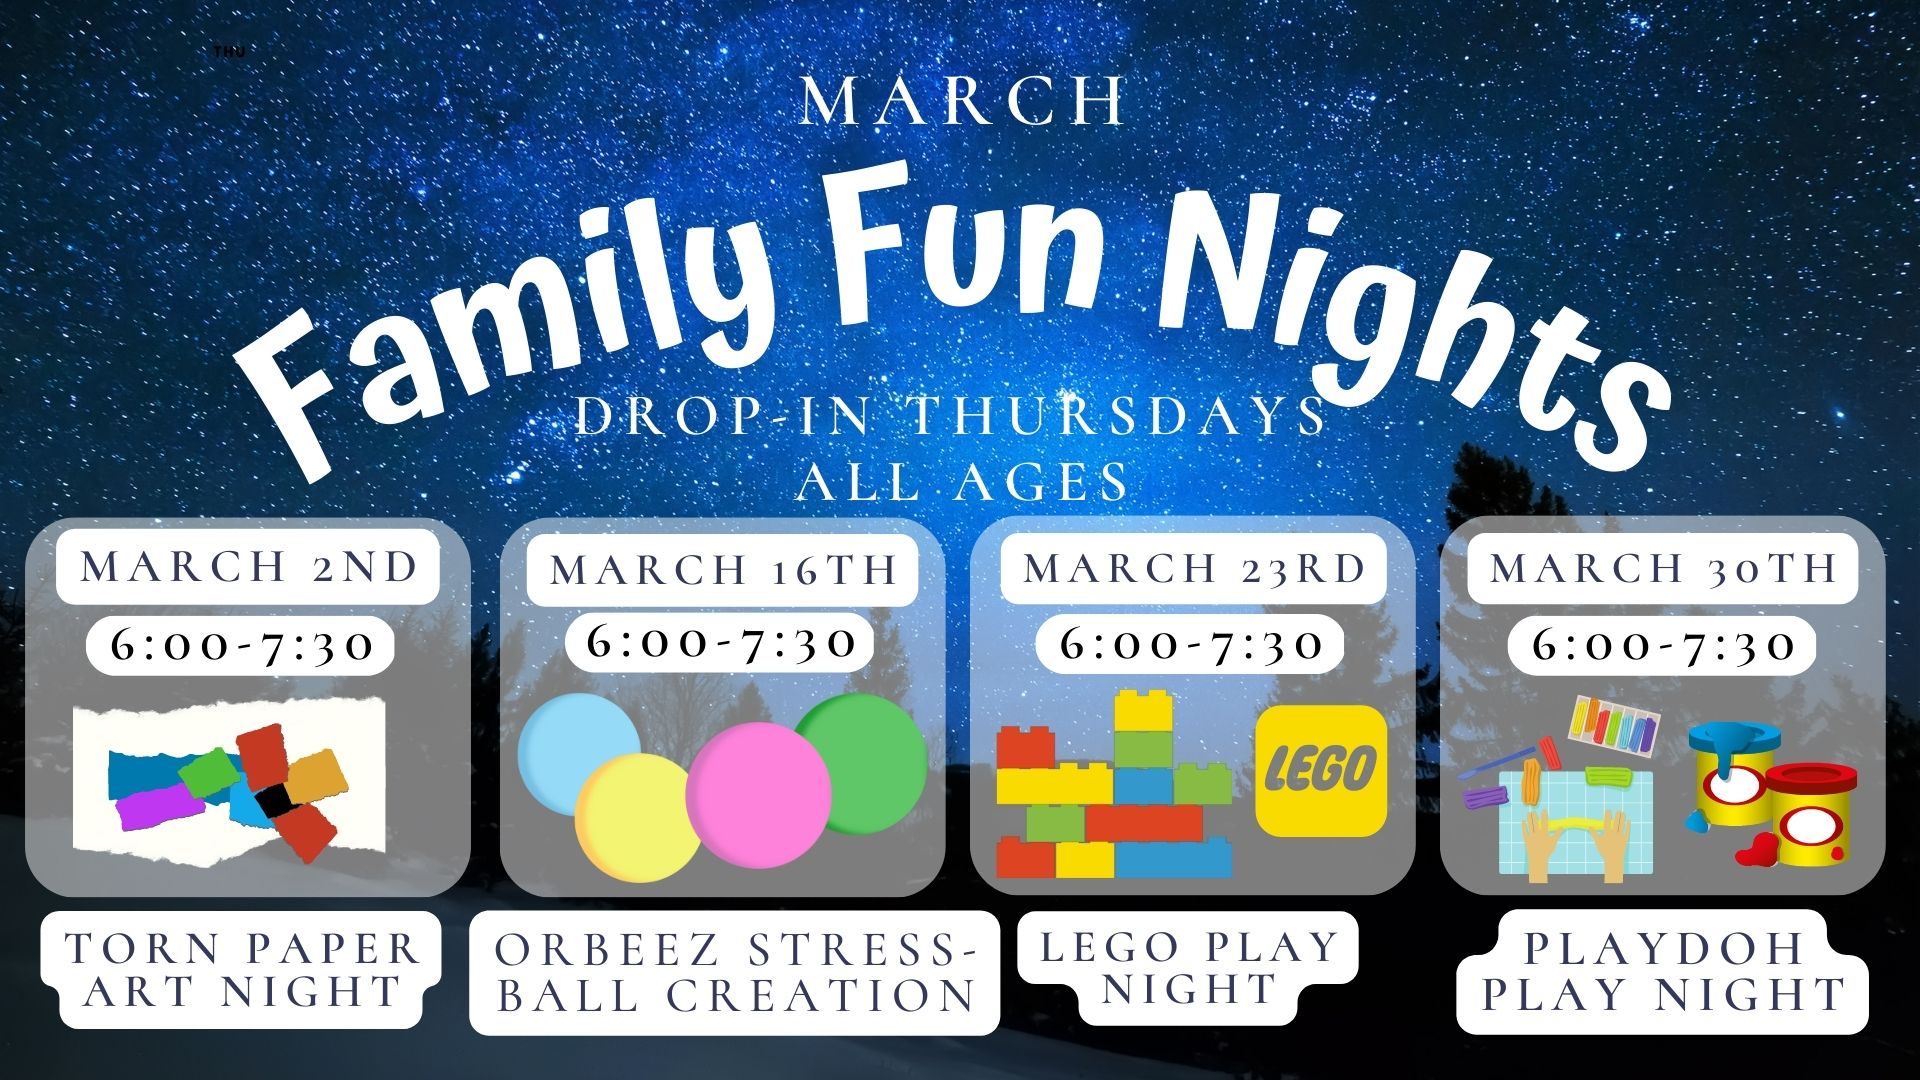 Text reads: March Family Fun Nights, Thursdays,  All Ages.  March 23rd 6:00 to 7:30 .    March 16th 6:00 to 7:30 Orbeez Stress-Ball Creation.  March 23rd 6:00 to 7:30 Lego Play Night.  March 30th 6:00-7:30 Playdoh Play Night. 